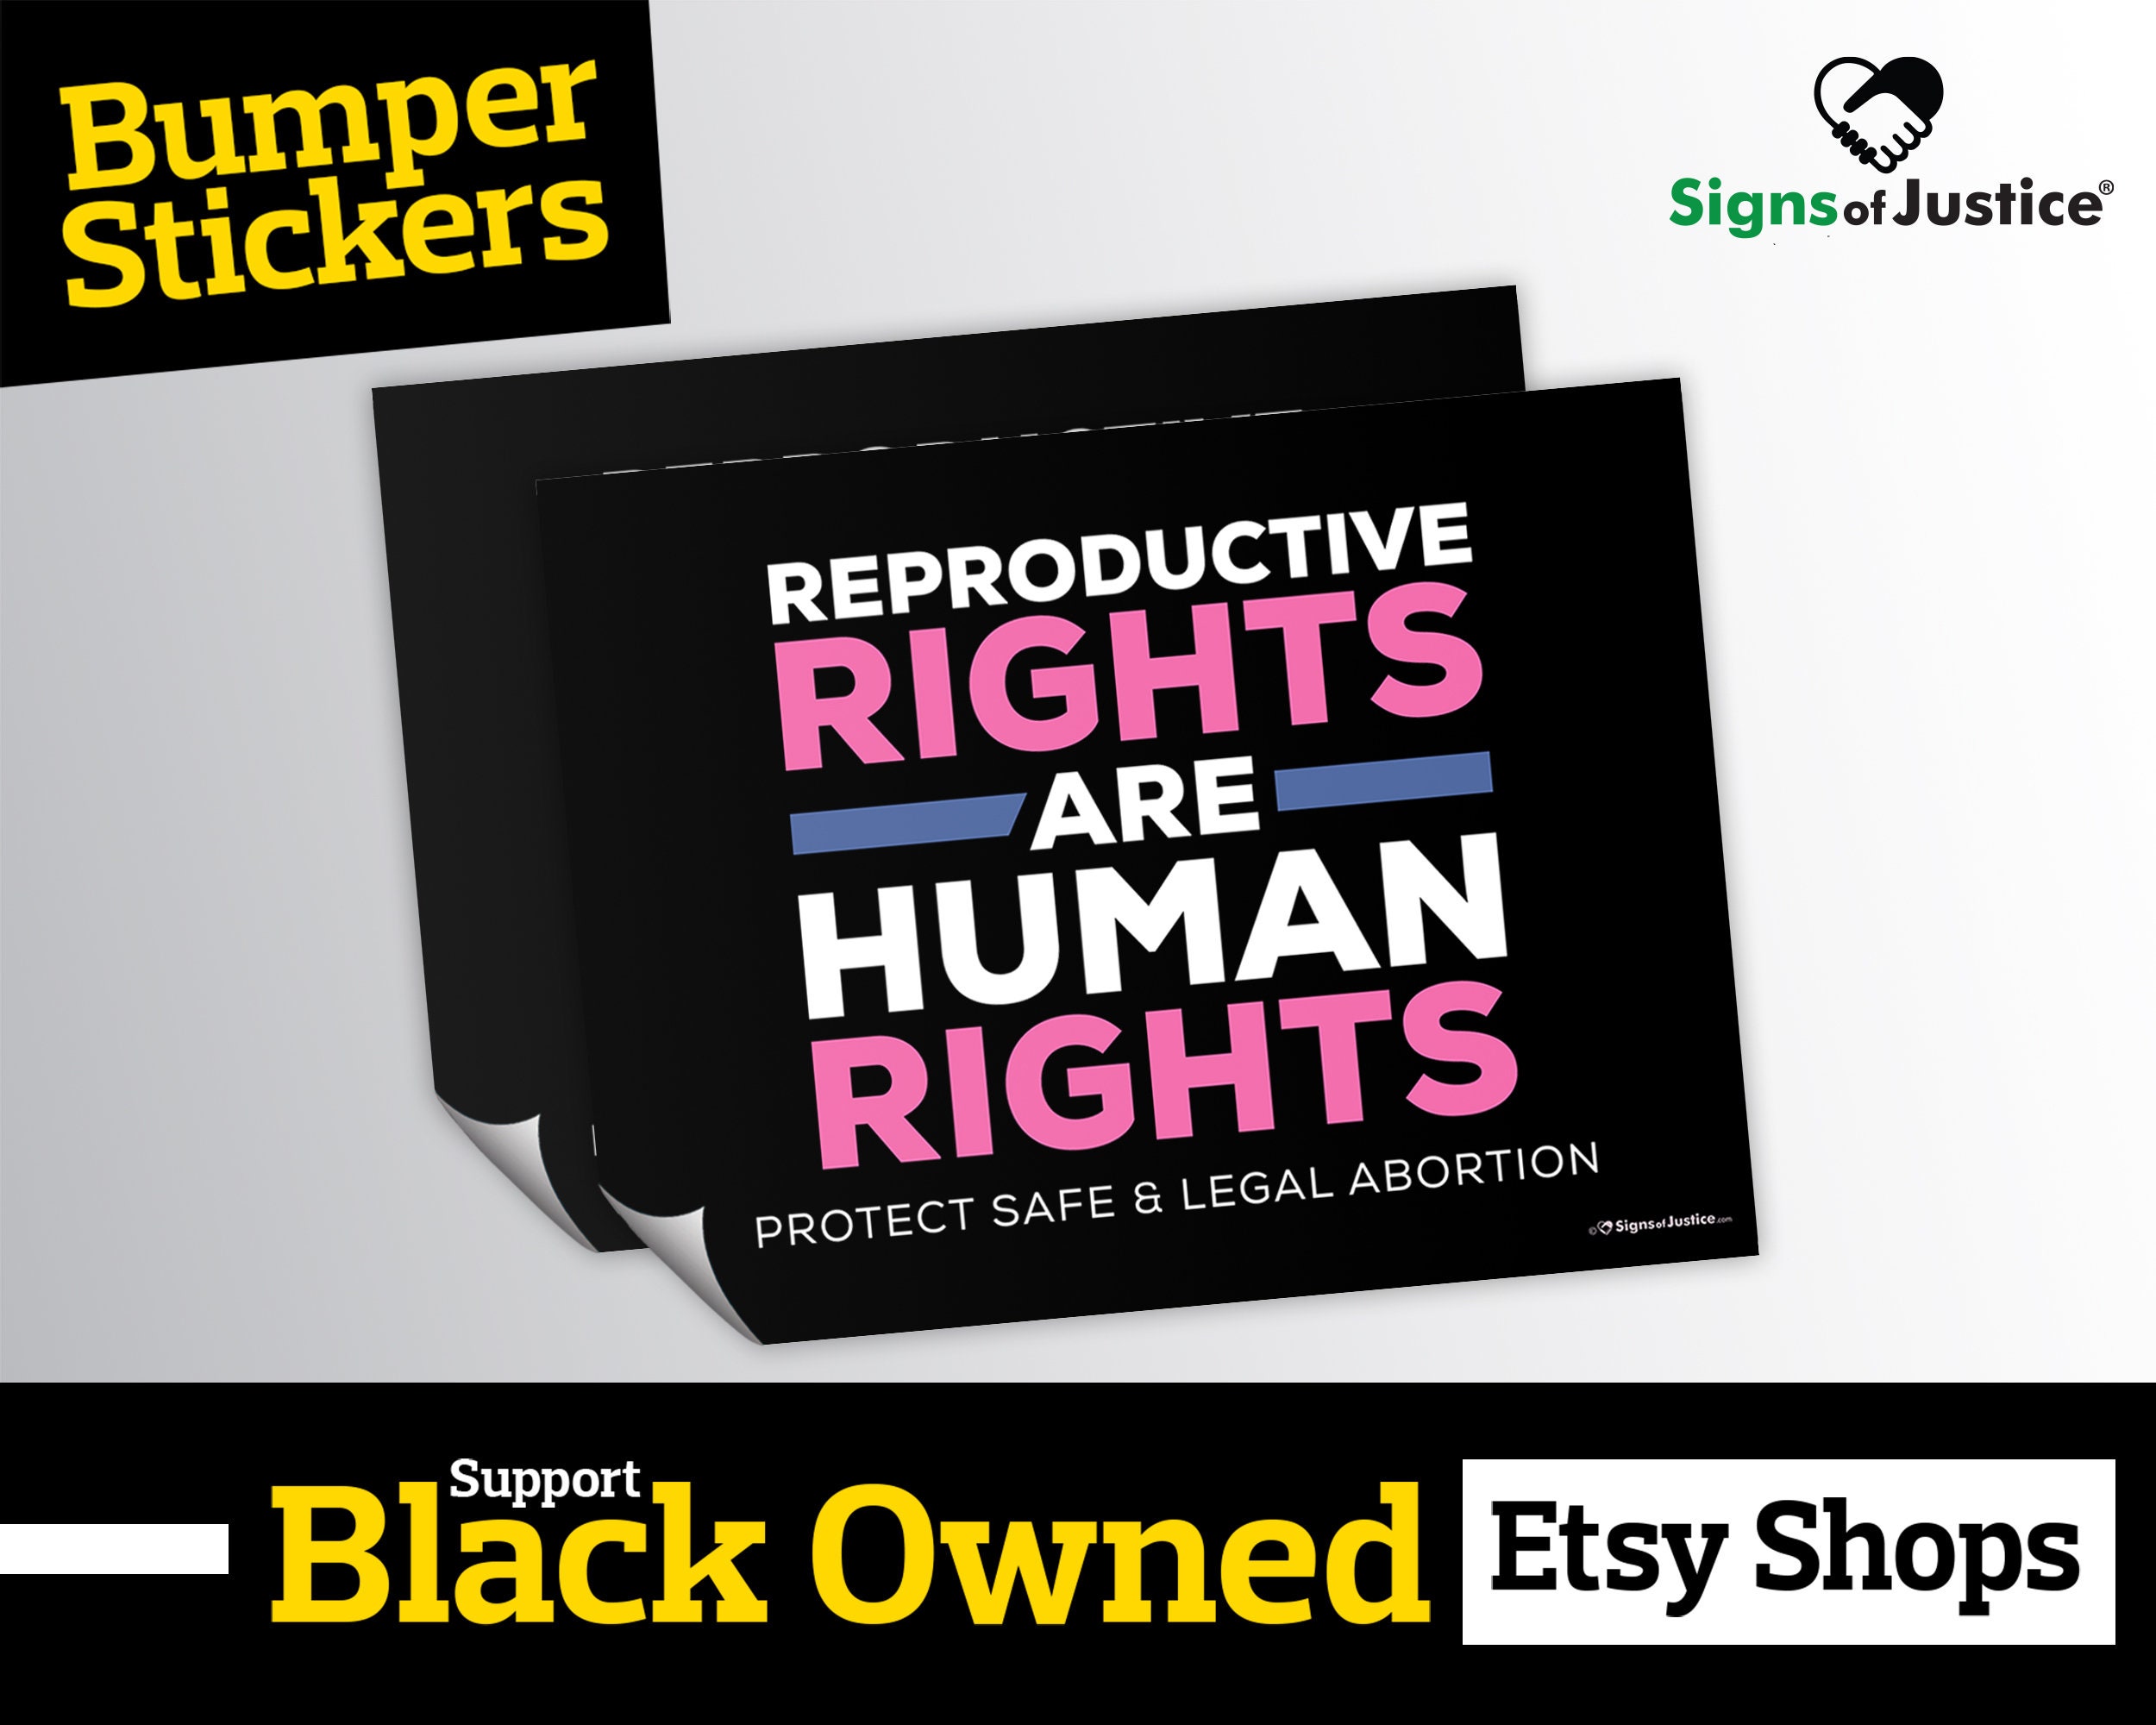 Reproductive Rights Bumper Sticker  6”x45”  Protective Gloss Layer  Social Justice Display  Car Decal